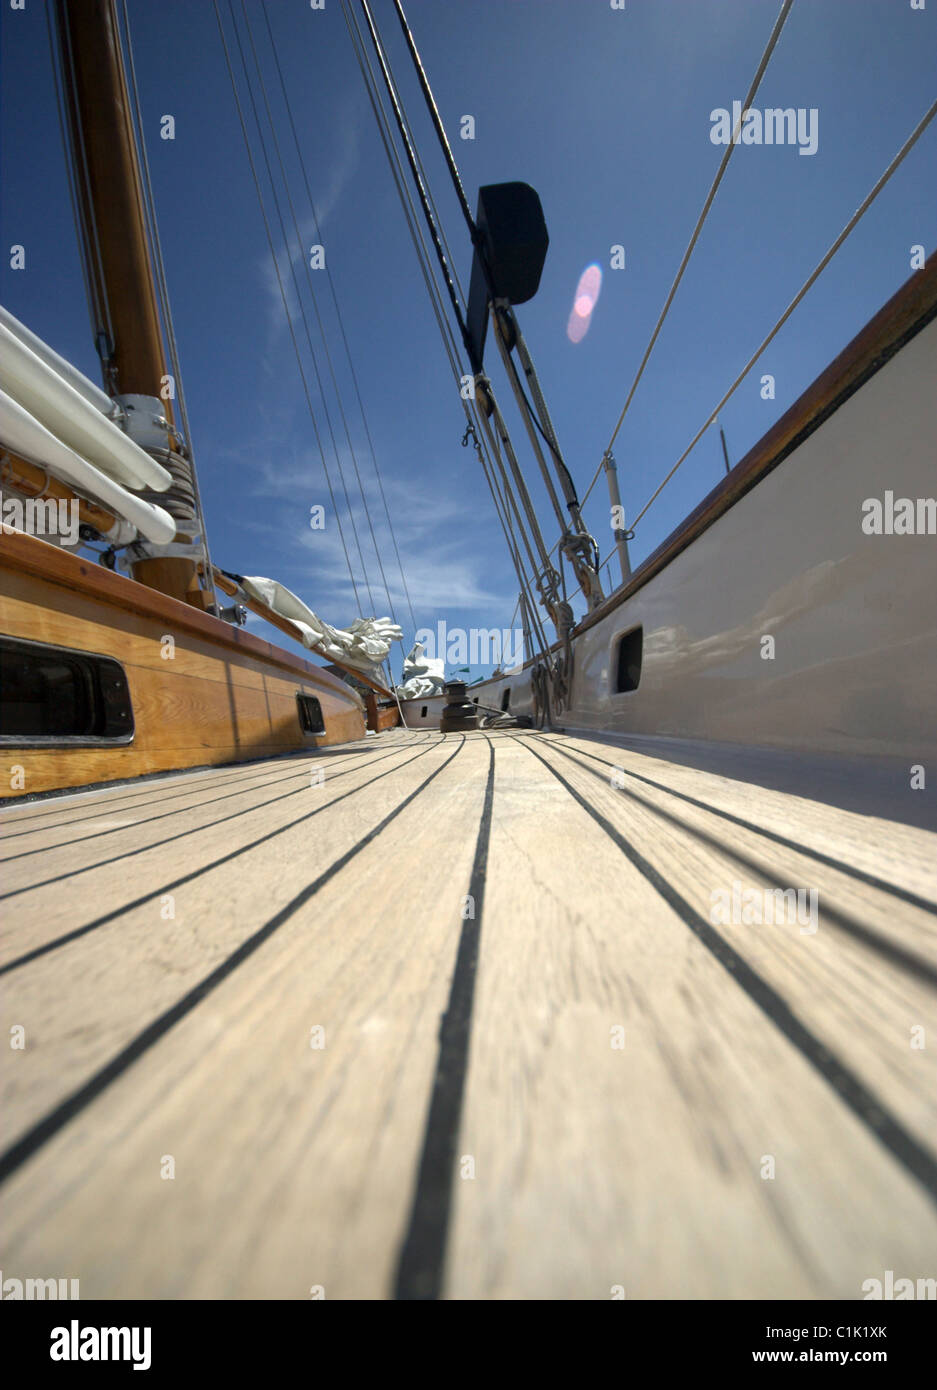 The view from the deck of a sailboat. Stock Photo